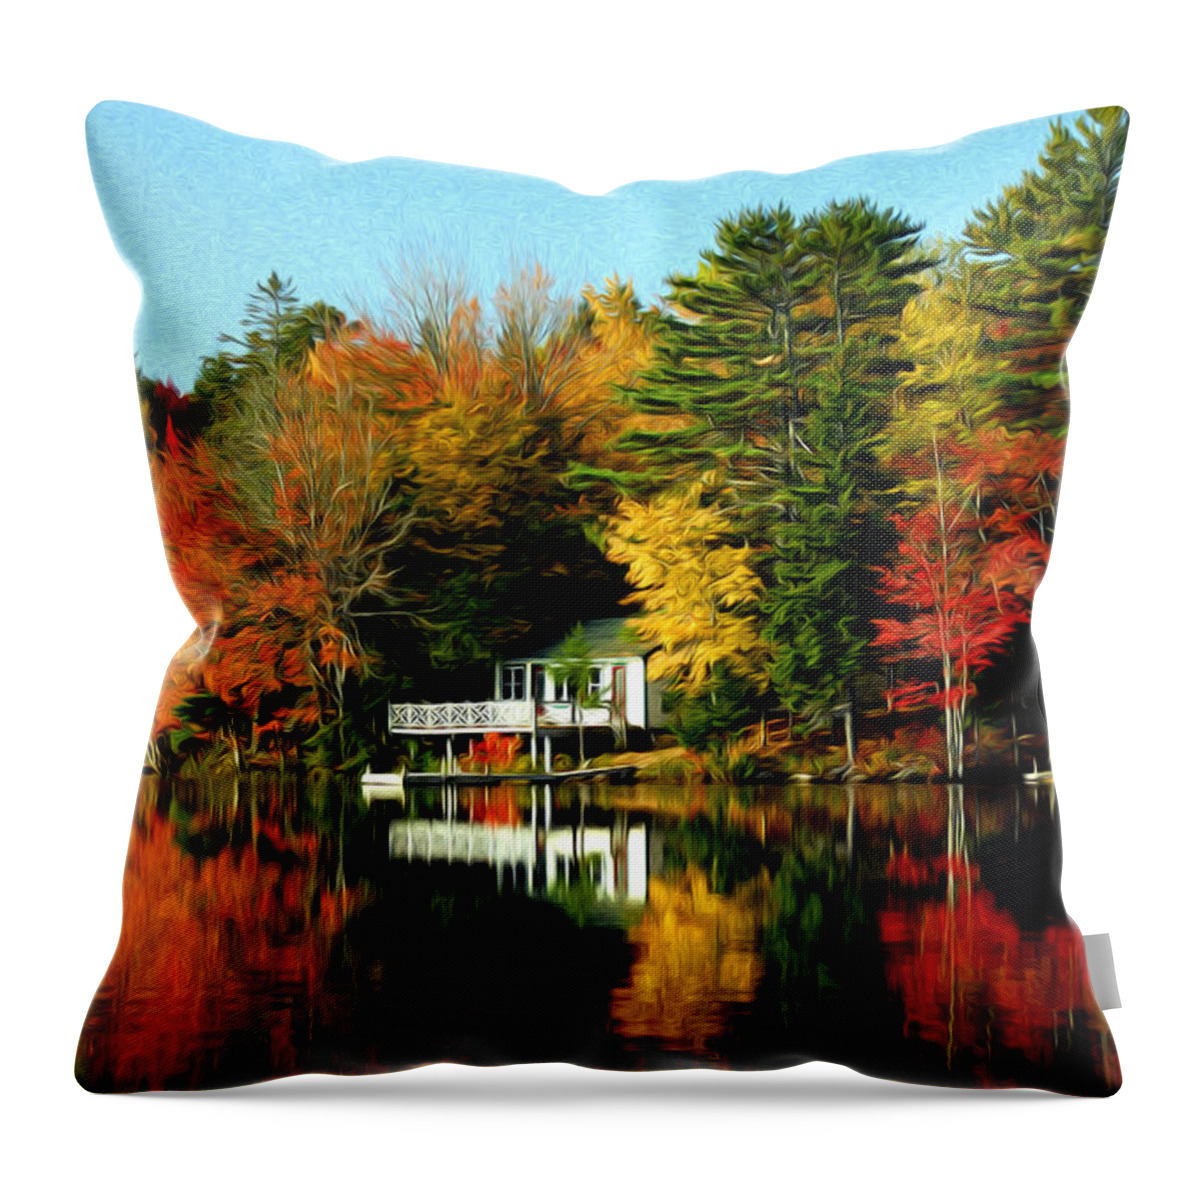 New England Throw Pillow featuring the photograph New England by Bill Howard